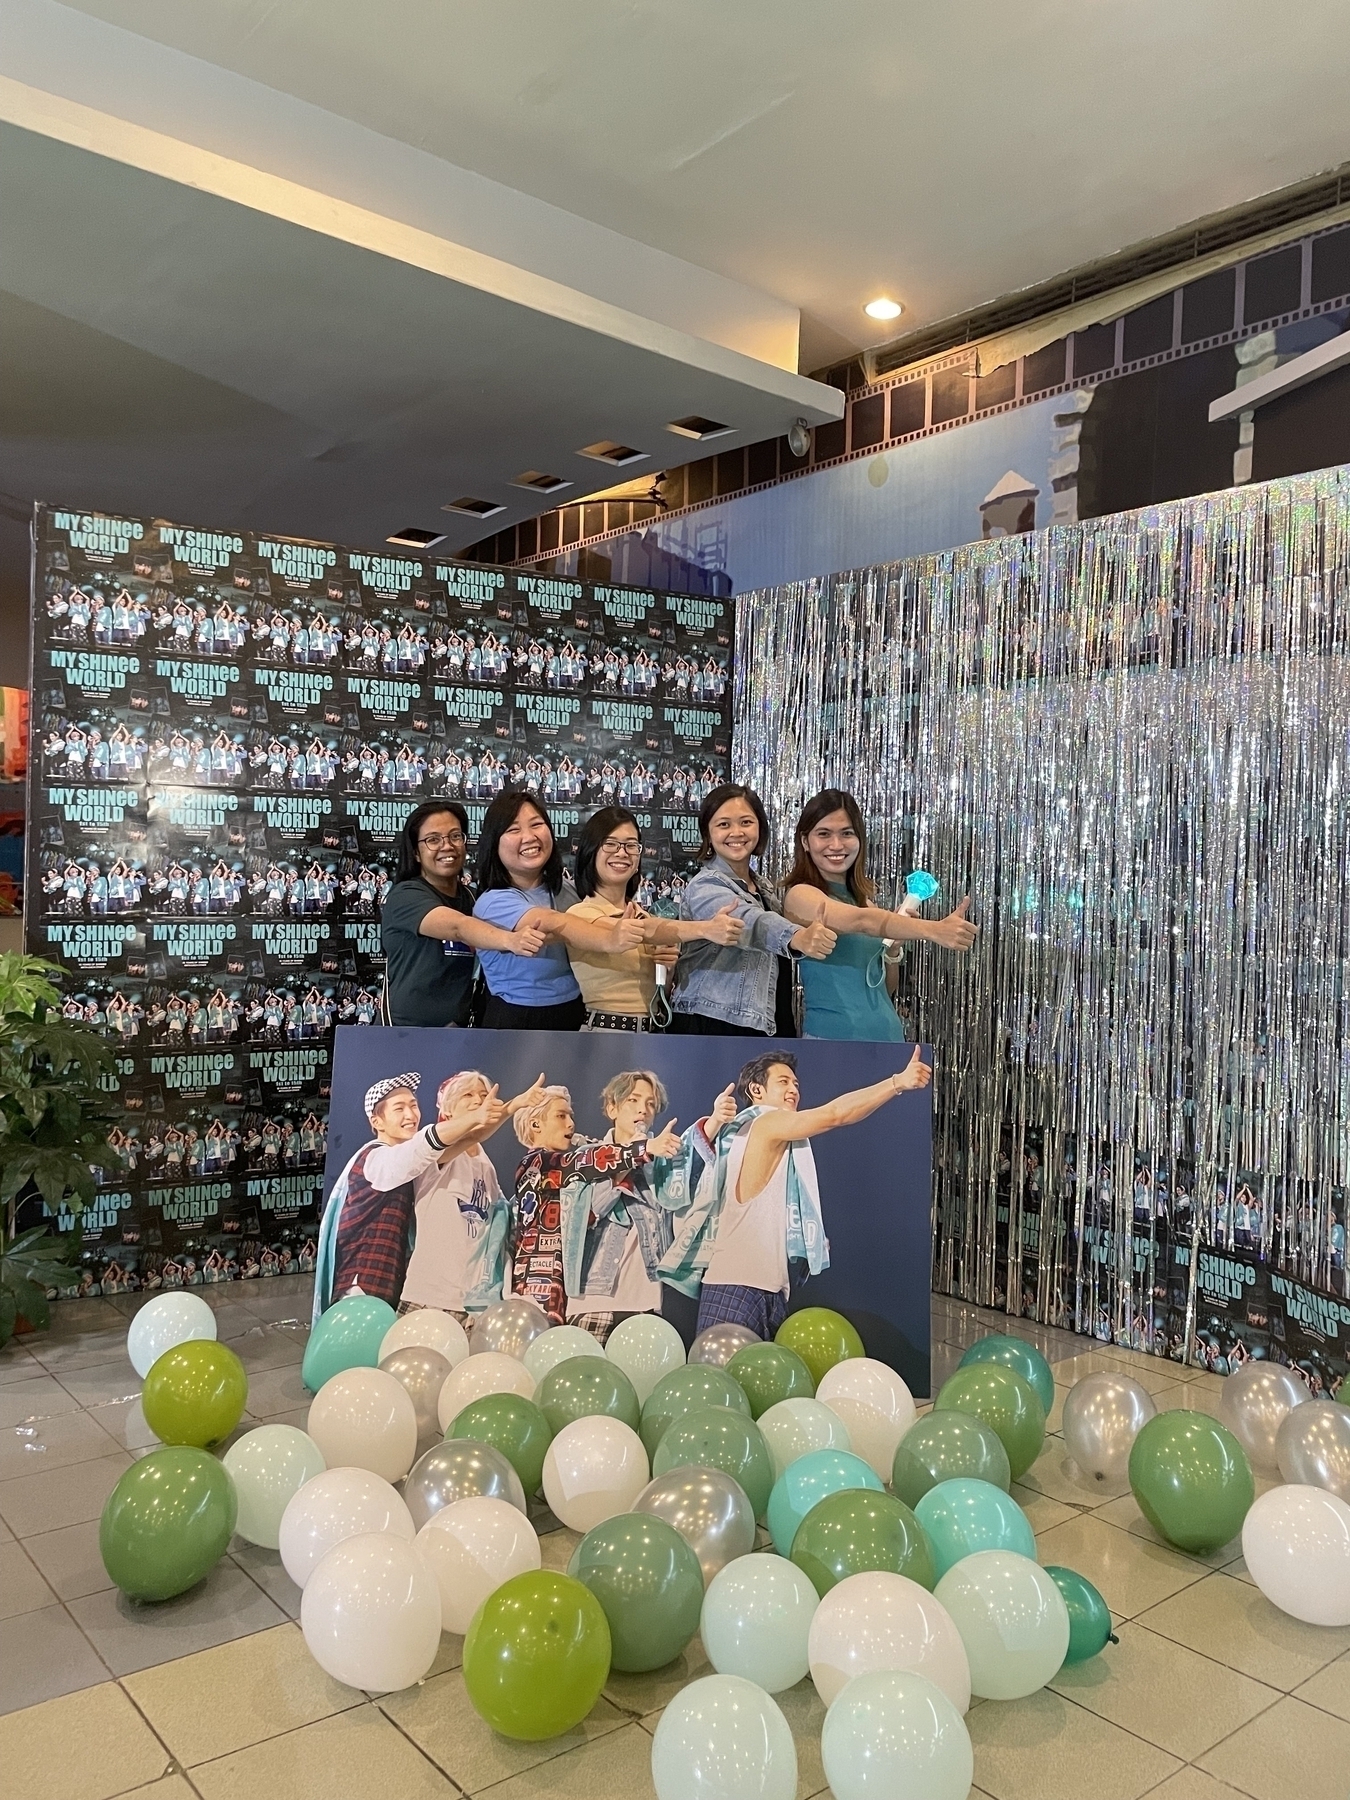 Group photo of Marie, Chi, Cathylou, Karen, and Joan behind a big photo stand of the SHINee members and mimicking the pose of Onew, Taemin, Jonghyun, Key, and Minho showing a thumbs up to the right side of the area. A tiled poster of My SHINee World is seen as a backdrop, with lots of balloons scattered in the foreground.